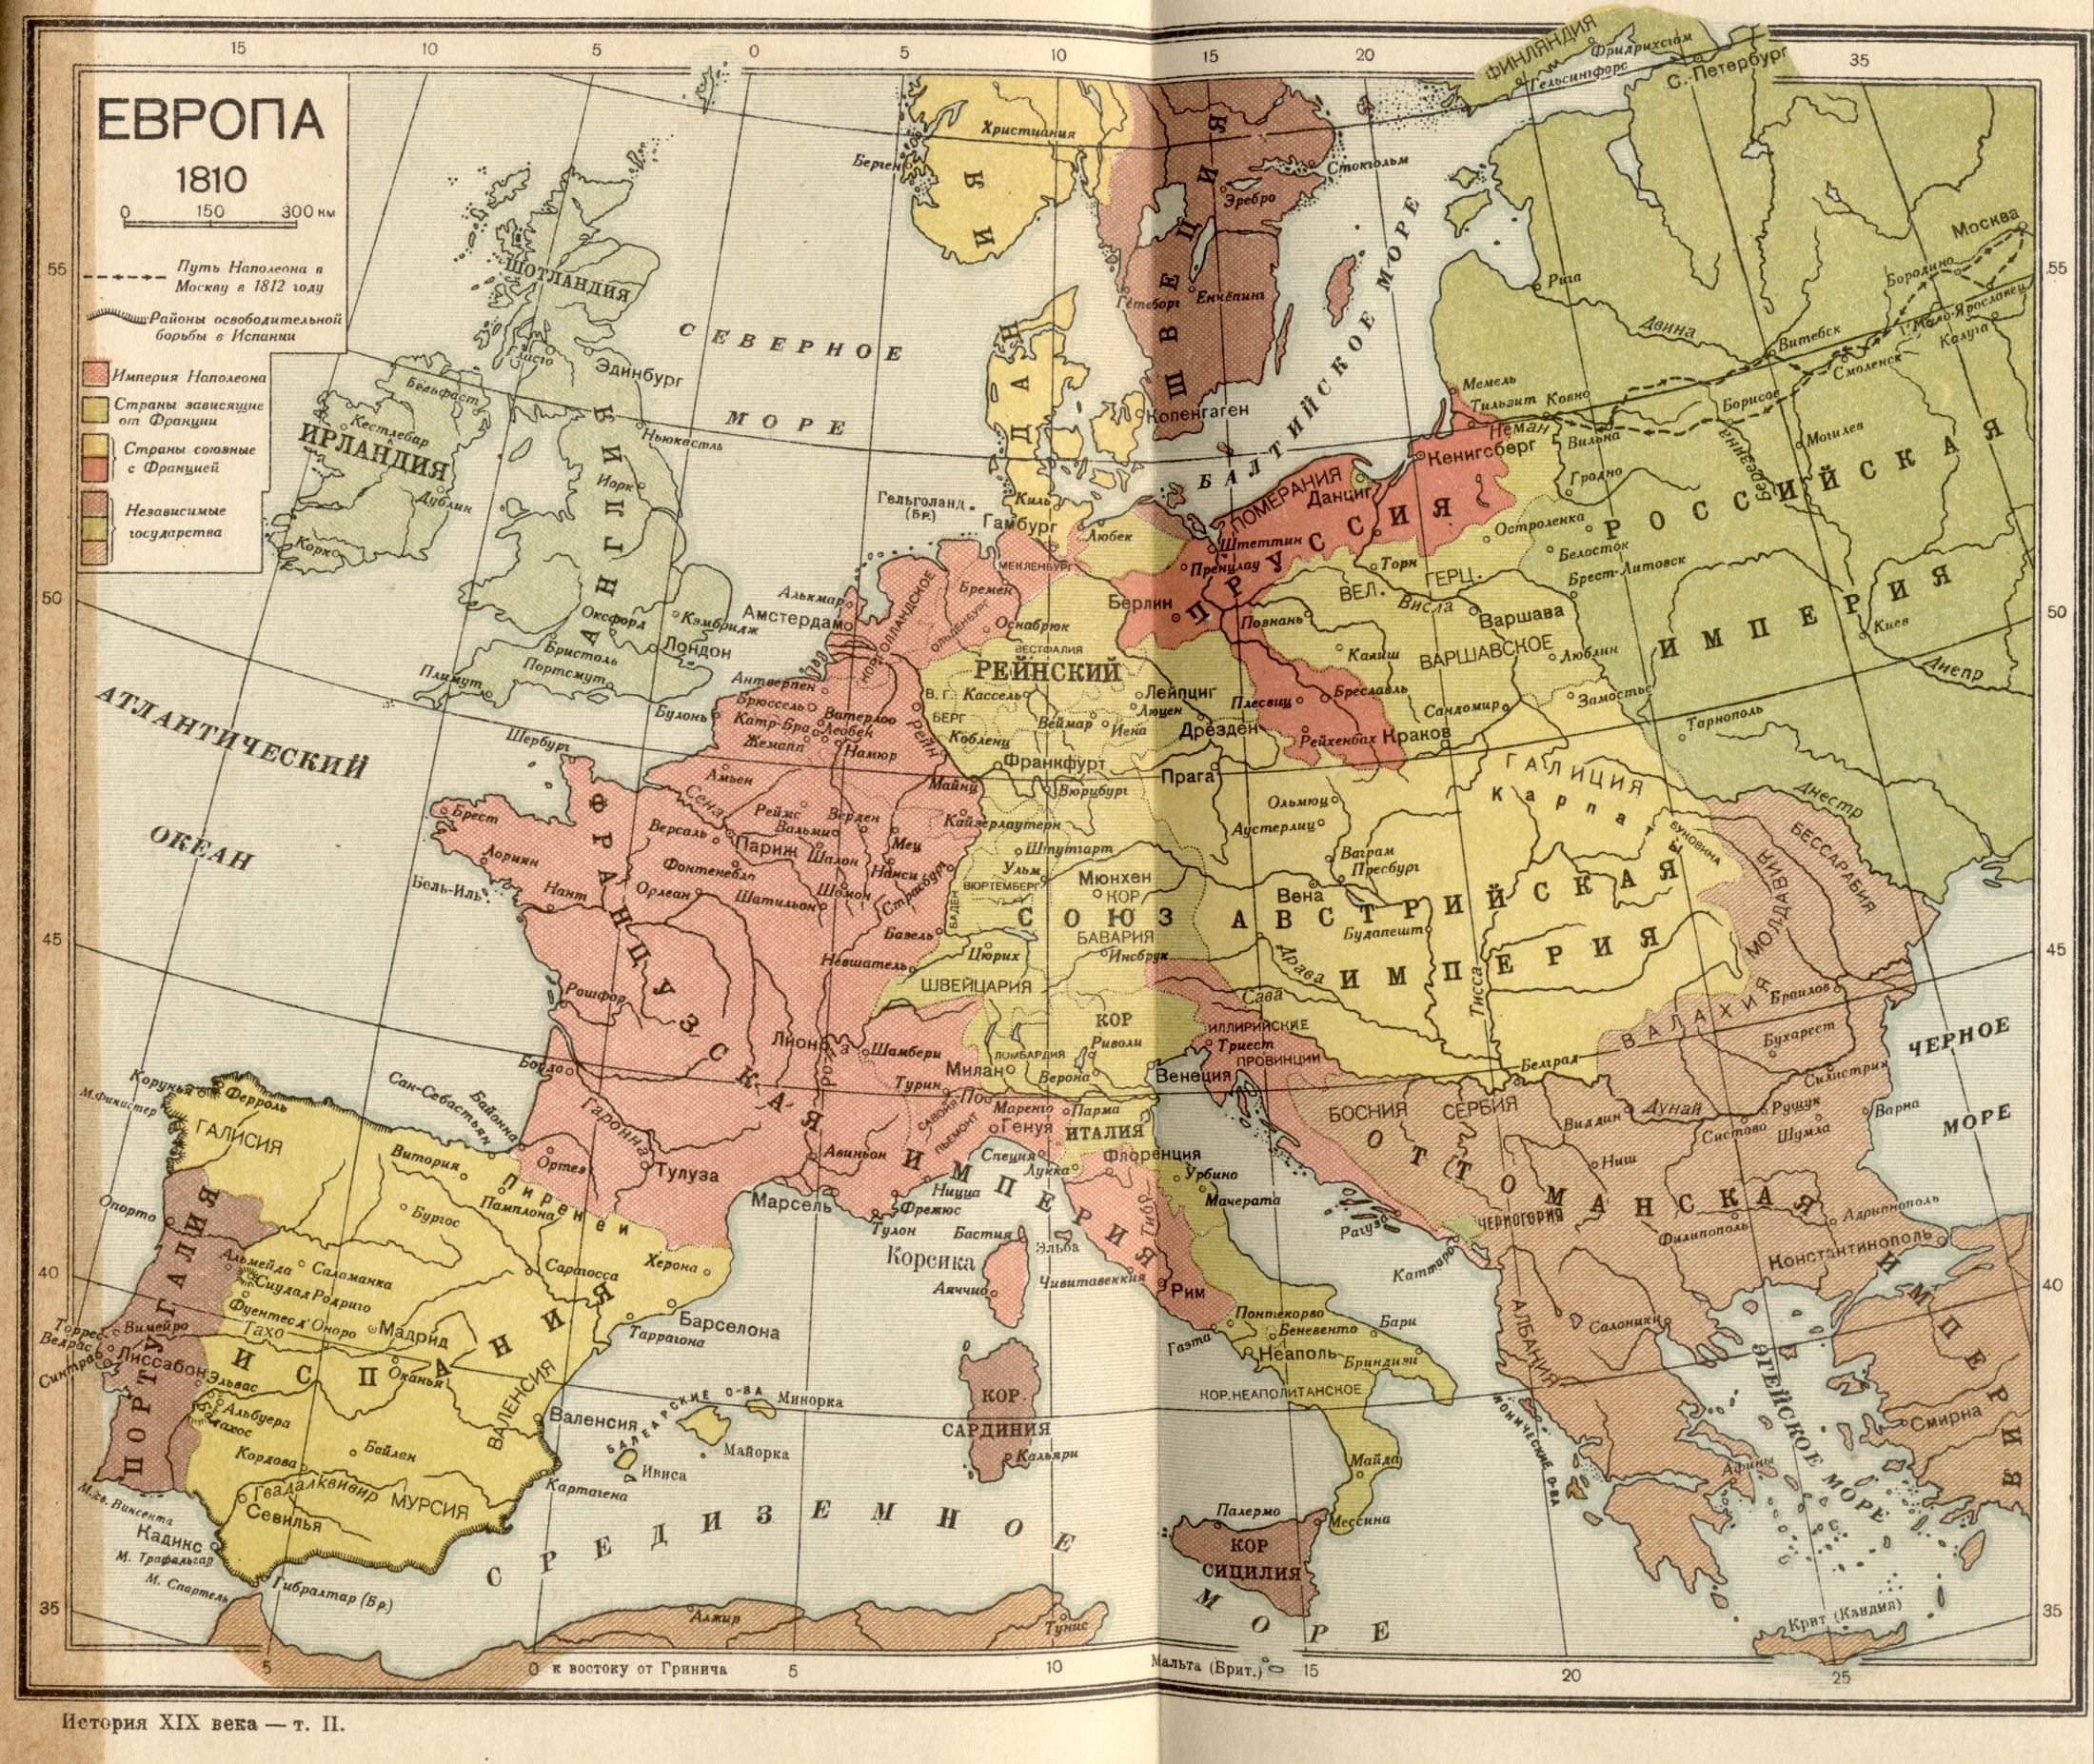 1810. The political map of Europe. Download a detailed map